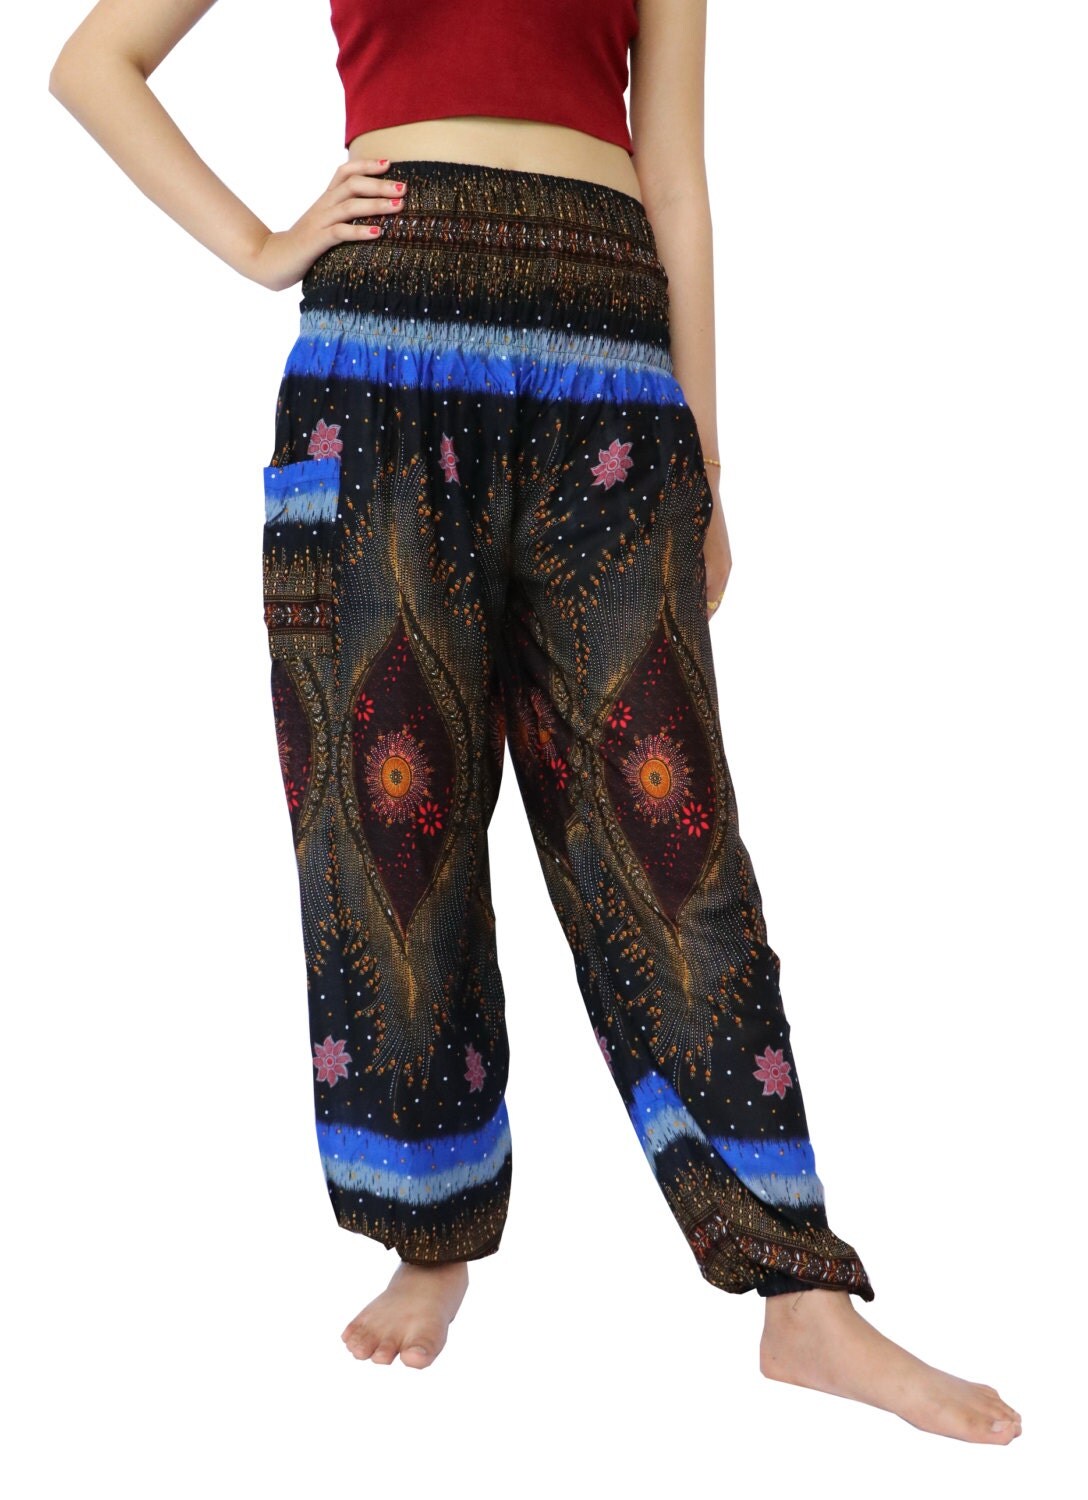 Hippies Hobo Clothing Clothes Gypsy Outfit Beach For Women